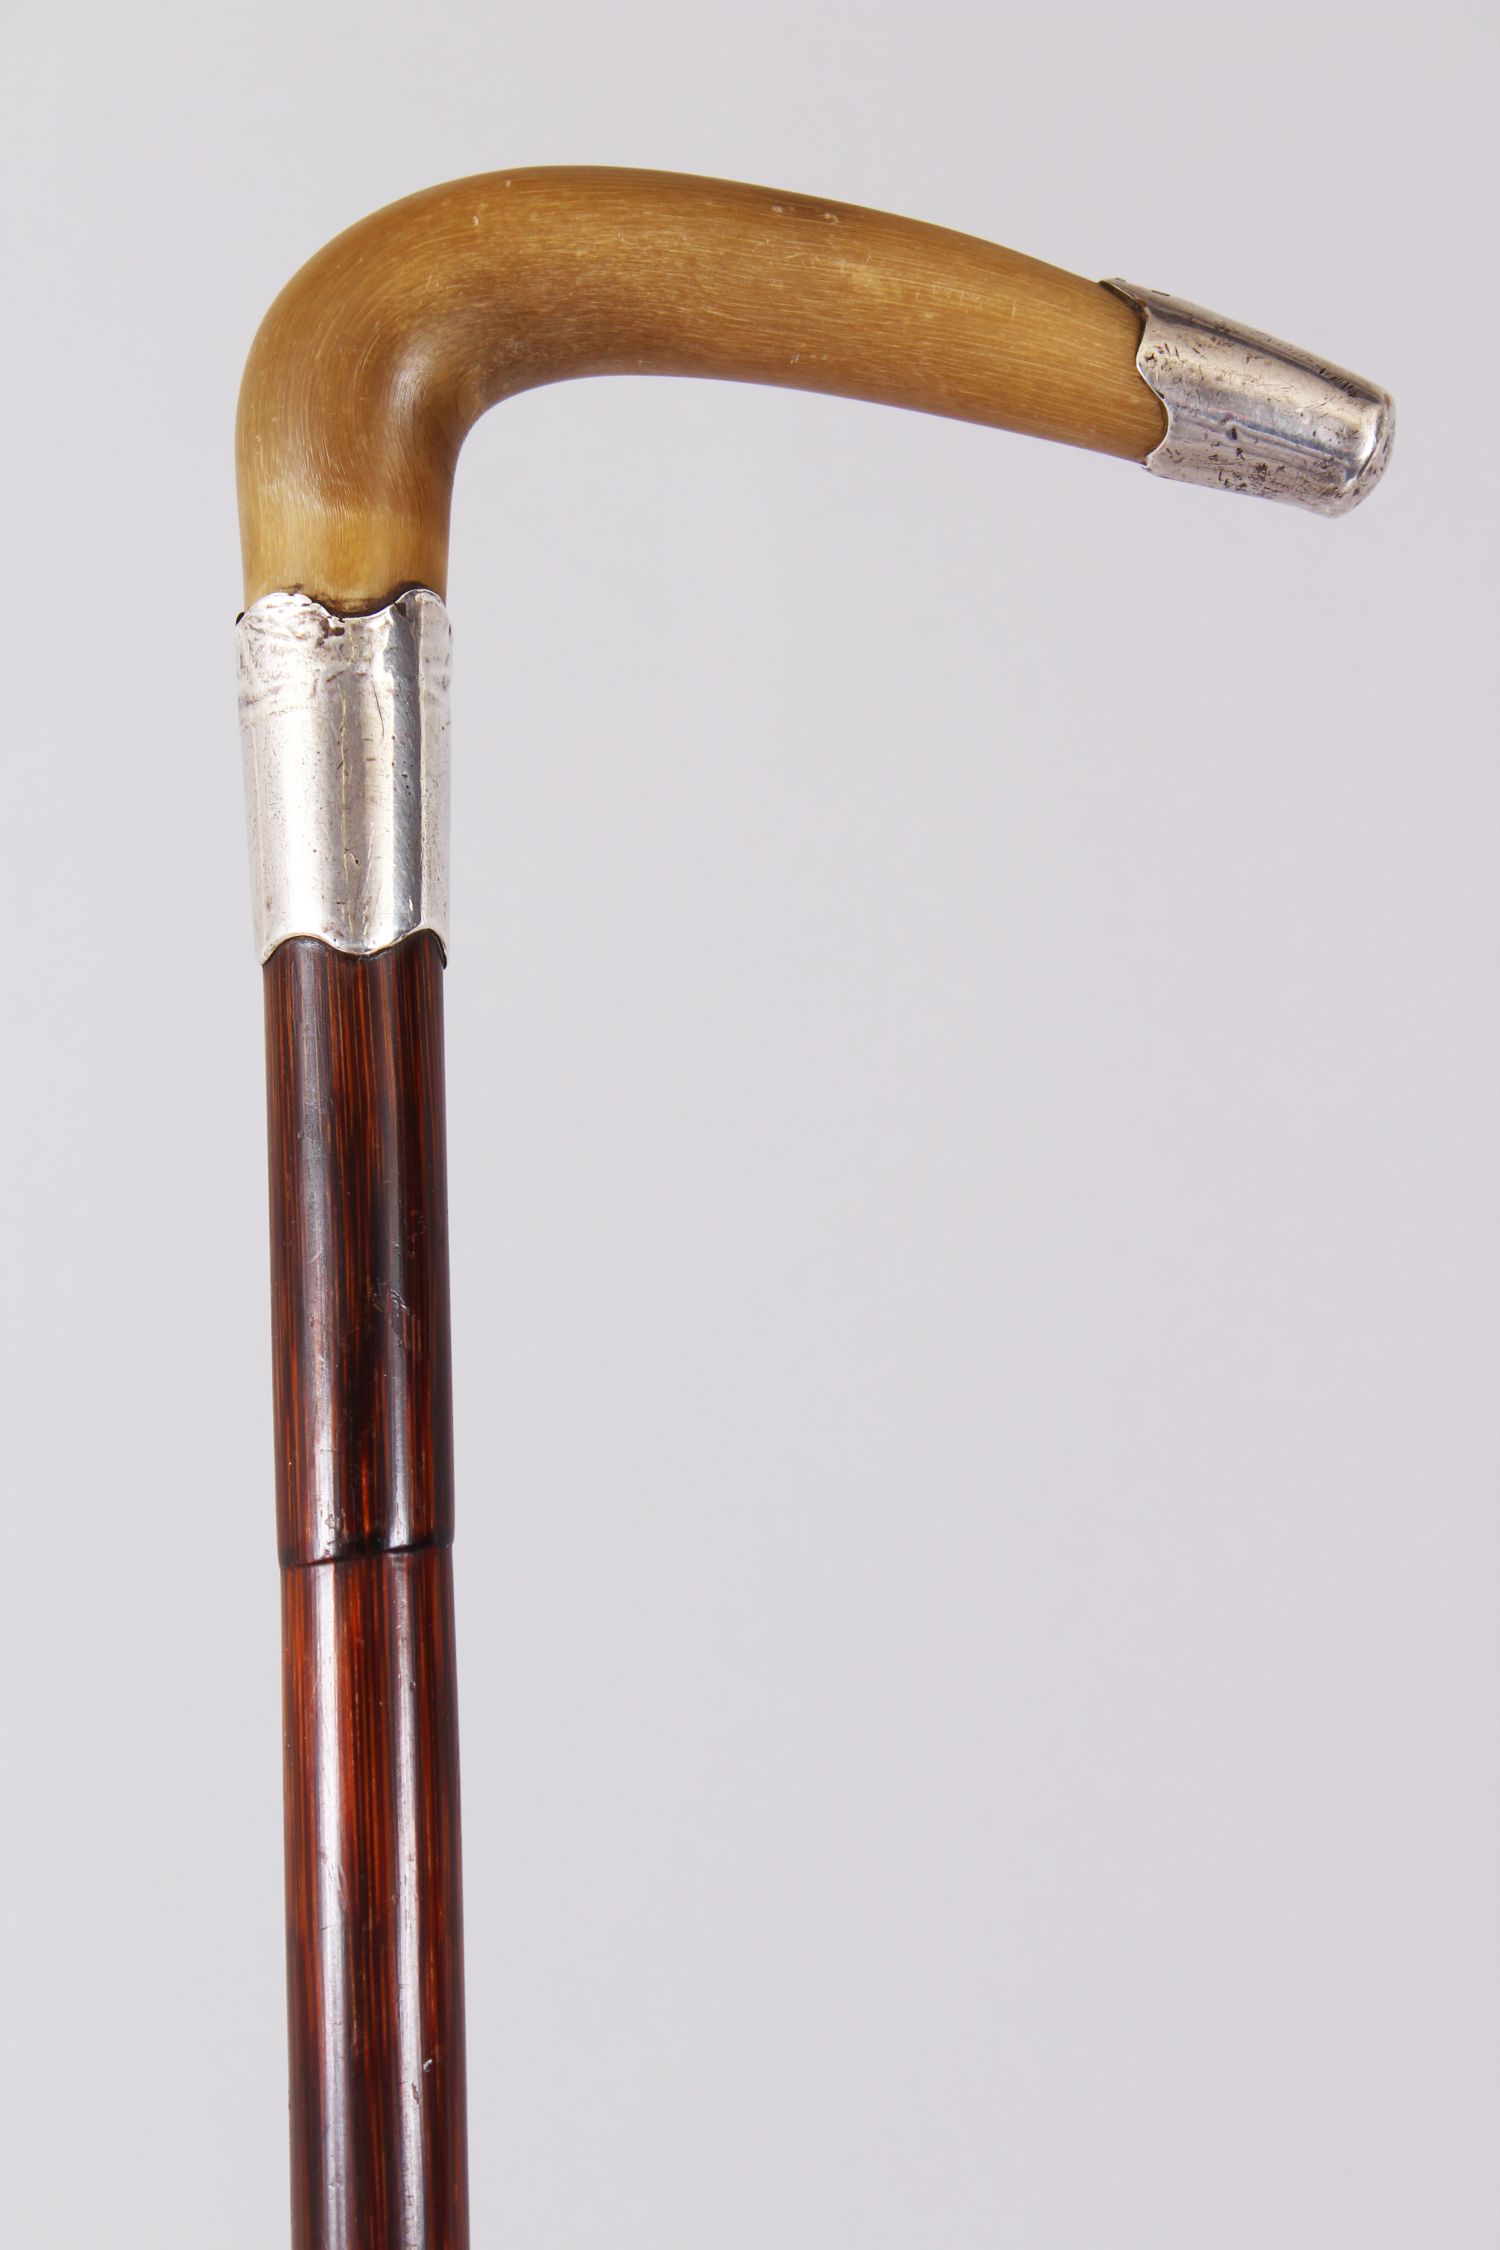 A RHINO HANDLED CANE, carved with a curving handle, silver tip and silver band. 84cm long.